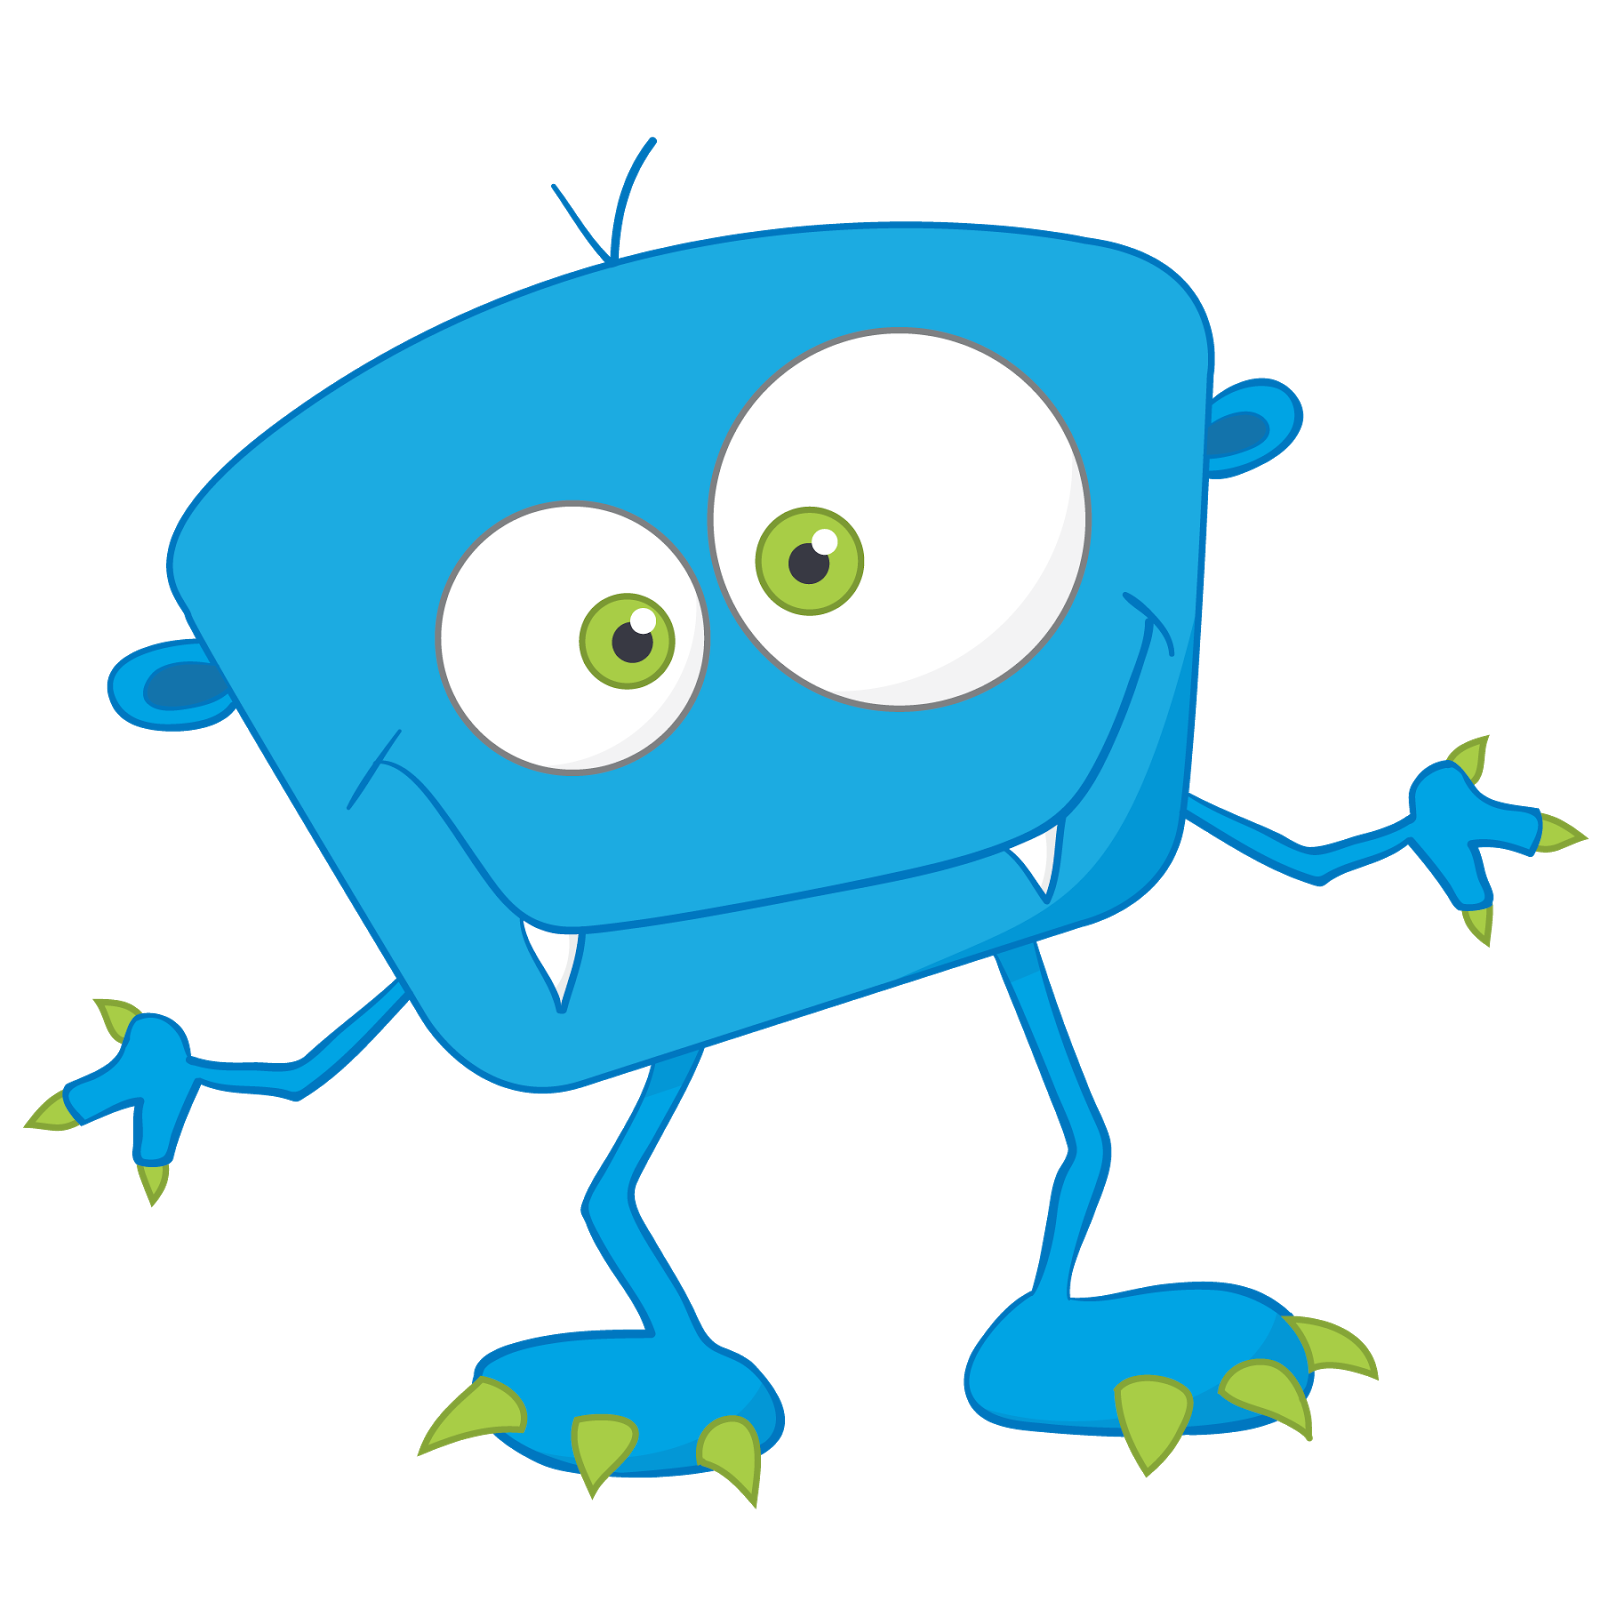 free vector monster clipart - photo #37